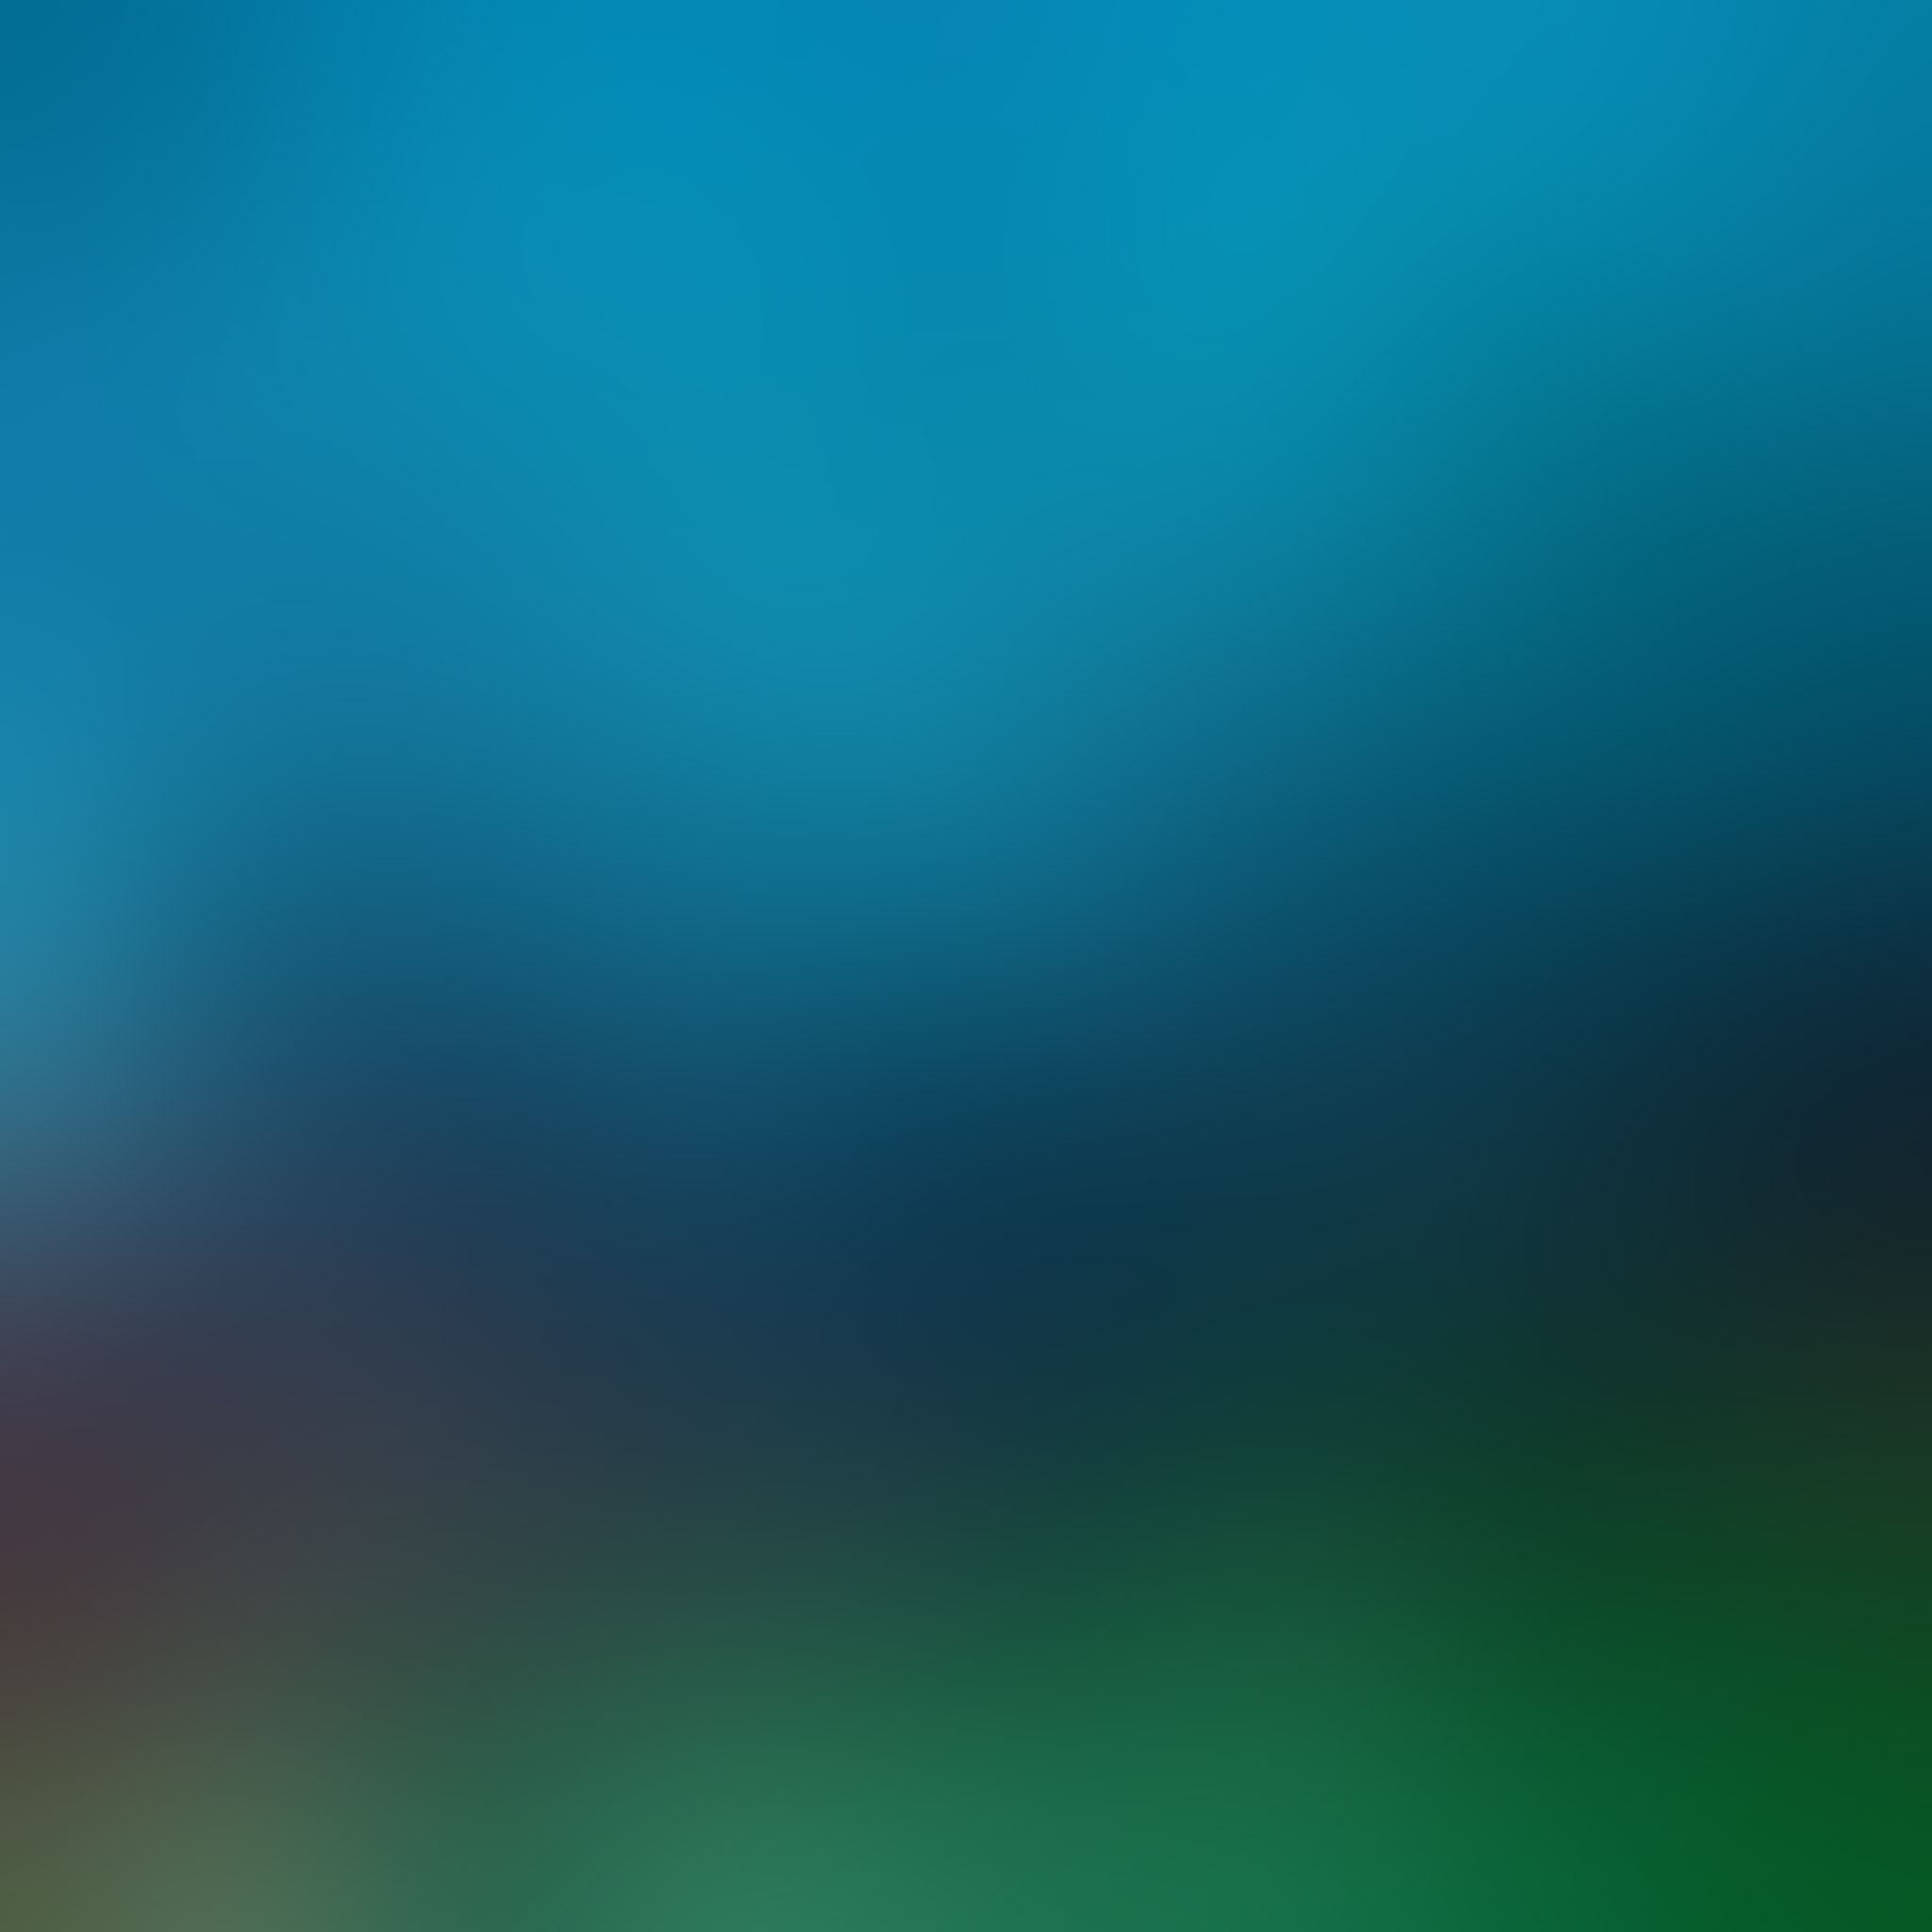 Blue Green Gradient iPad Air Wallpapers Free Download